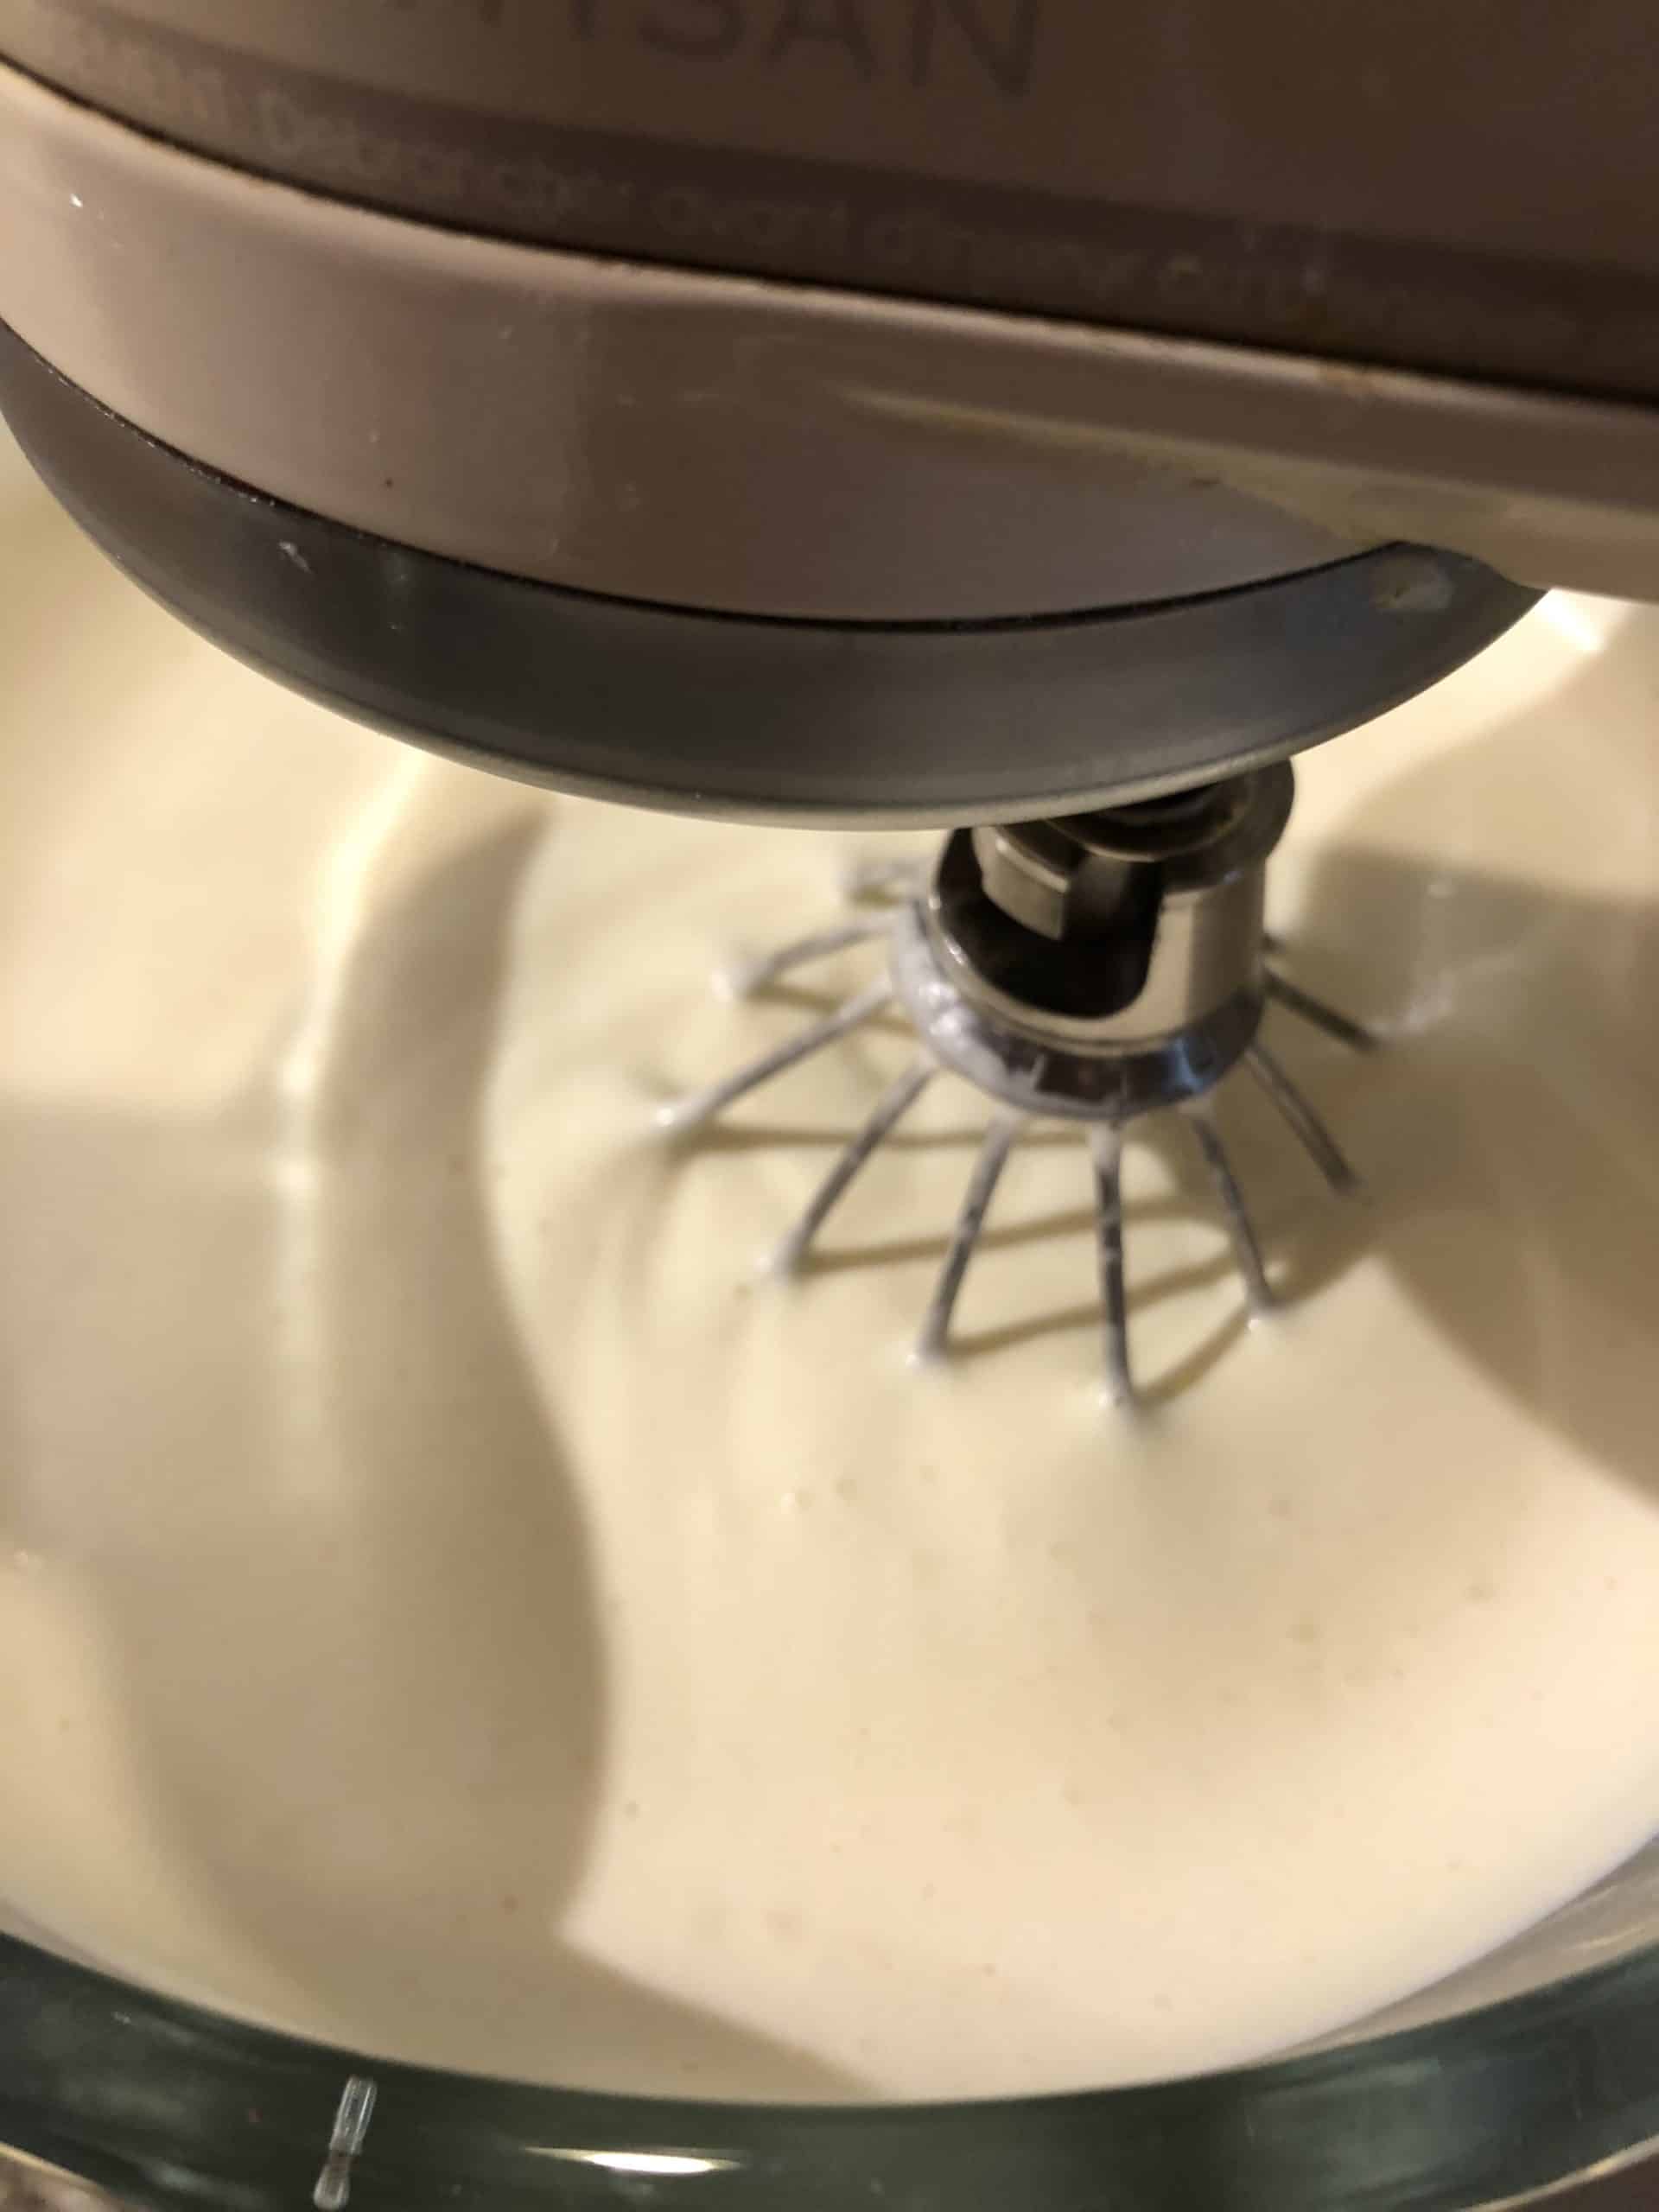 Whipped together Cheesecake Mixture